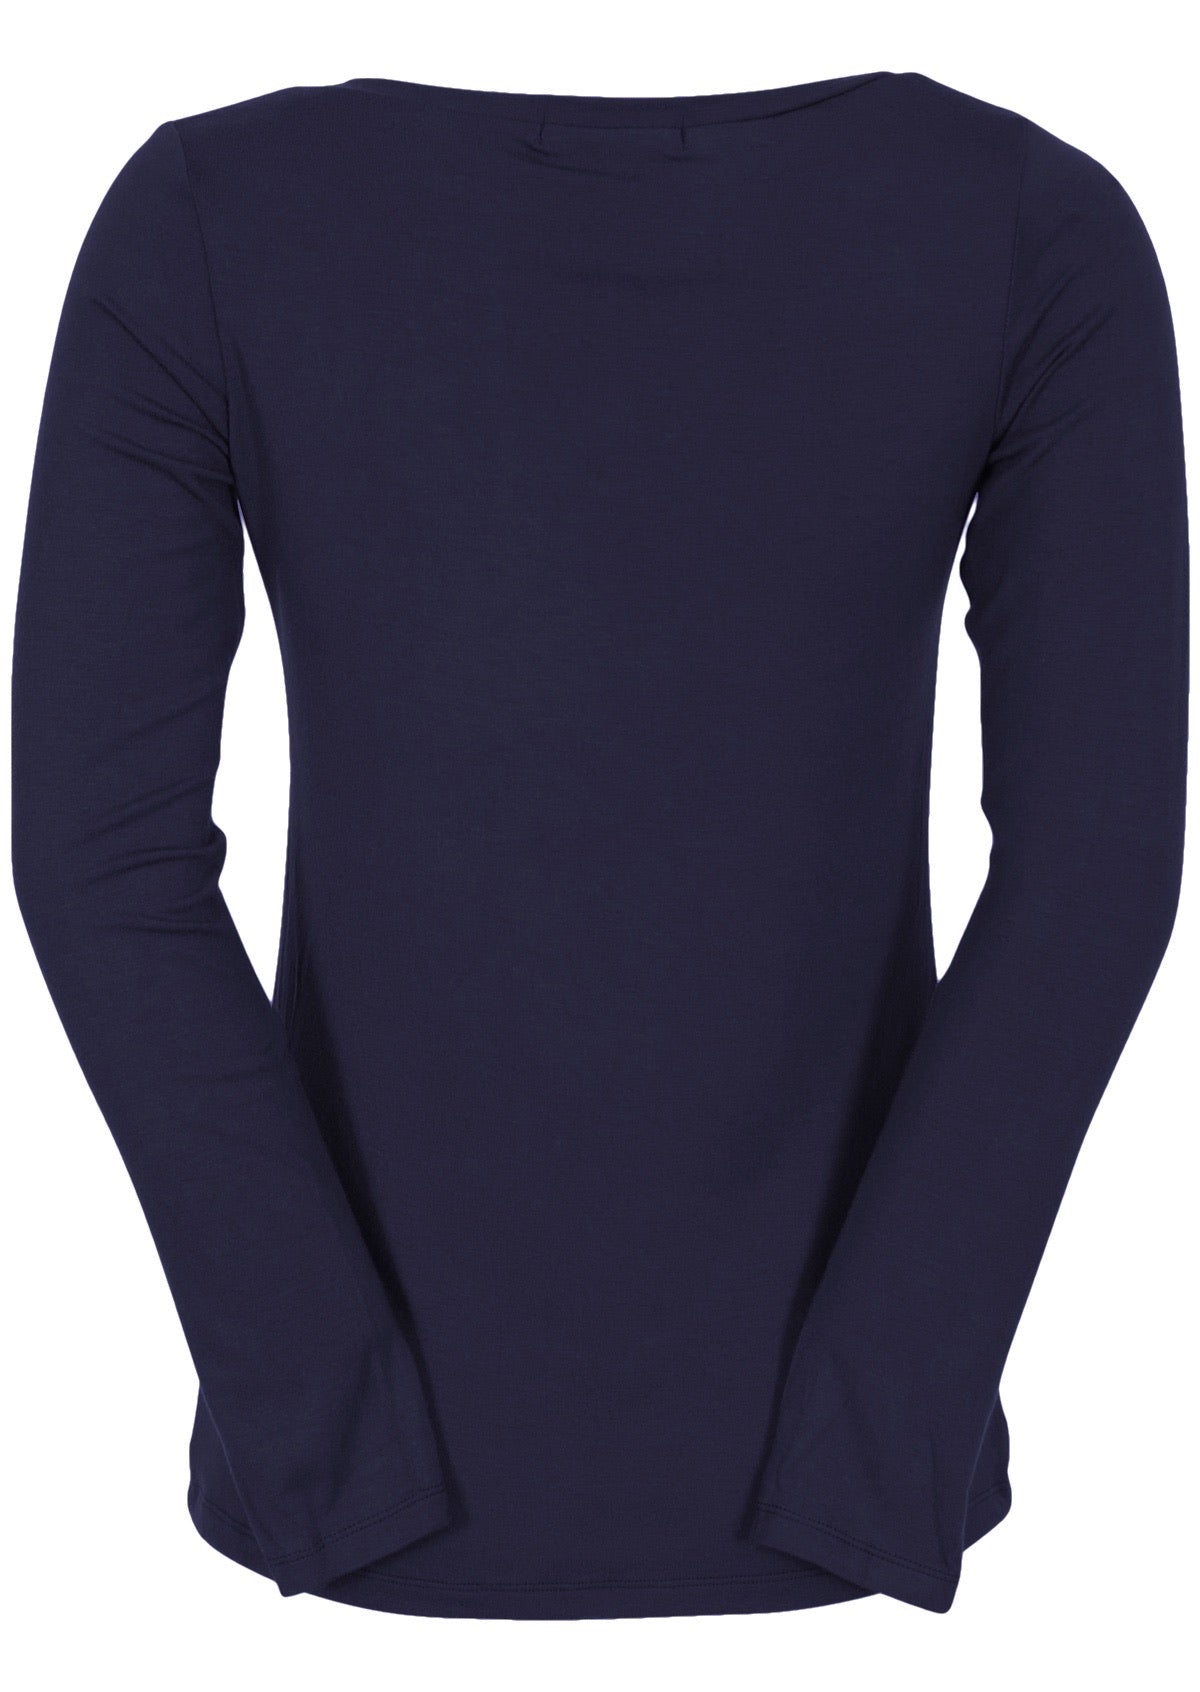 Back view of women's navy blue long sleeve stretch v-neck soft rayon top.